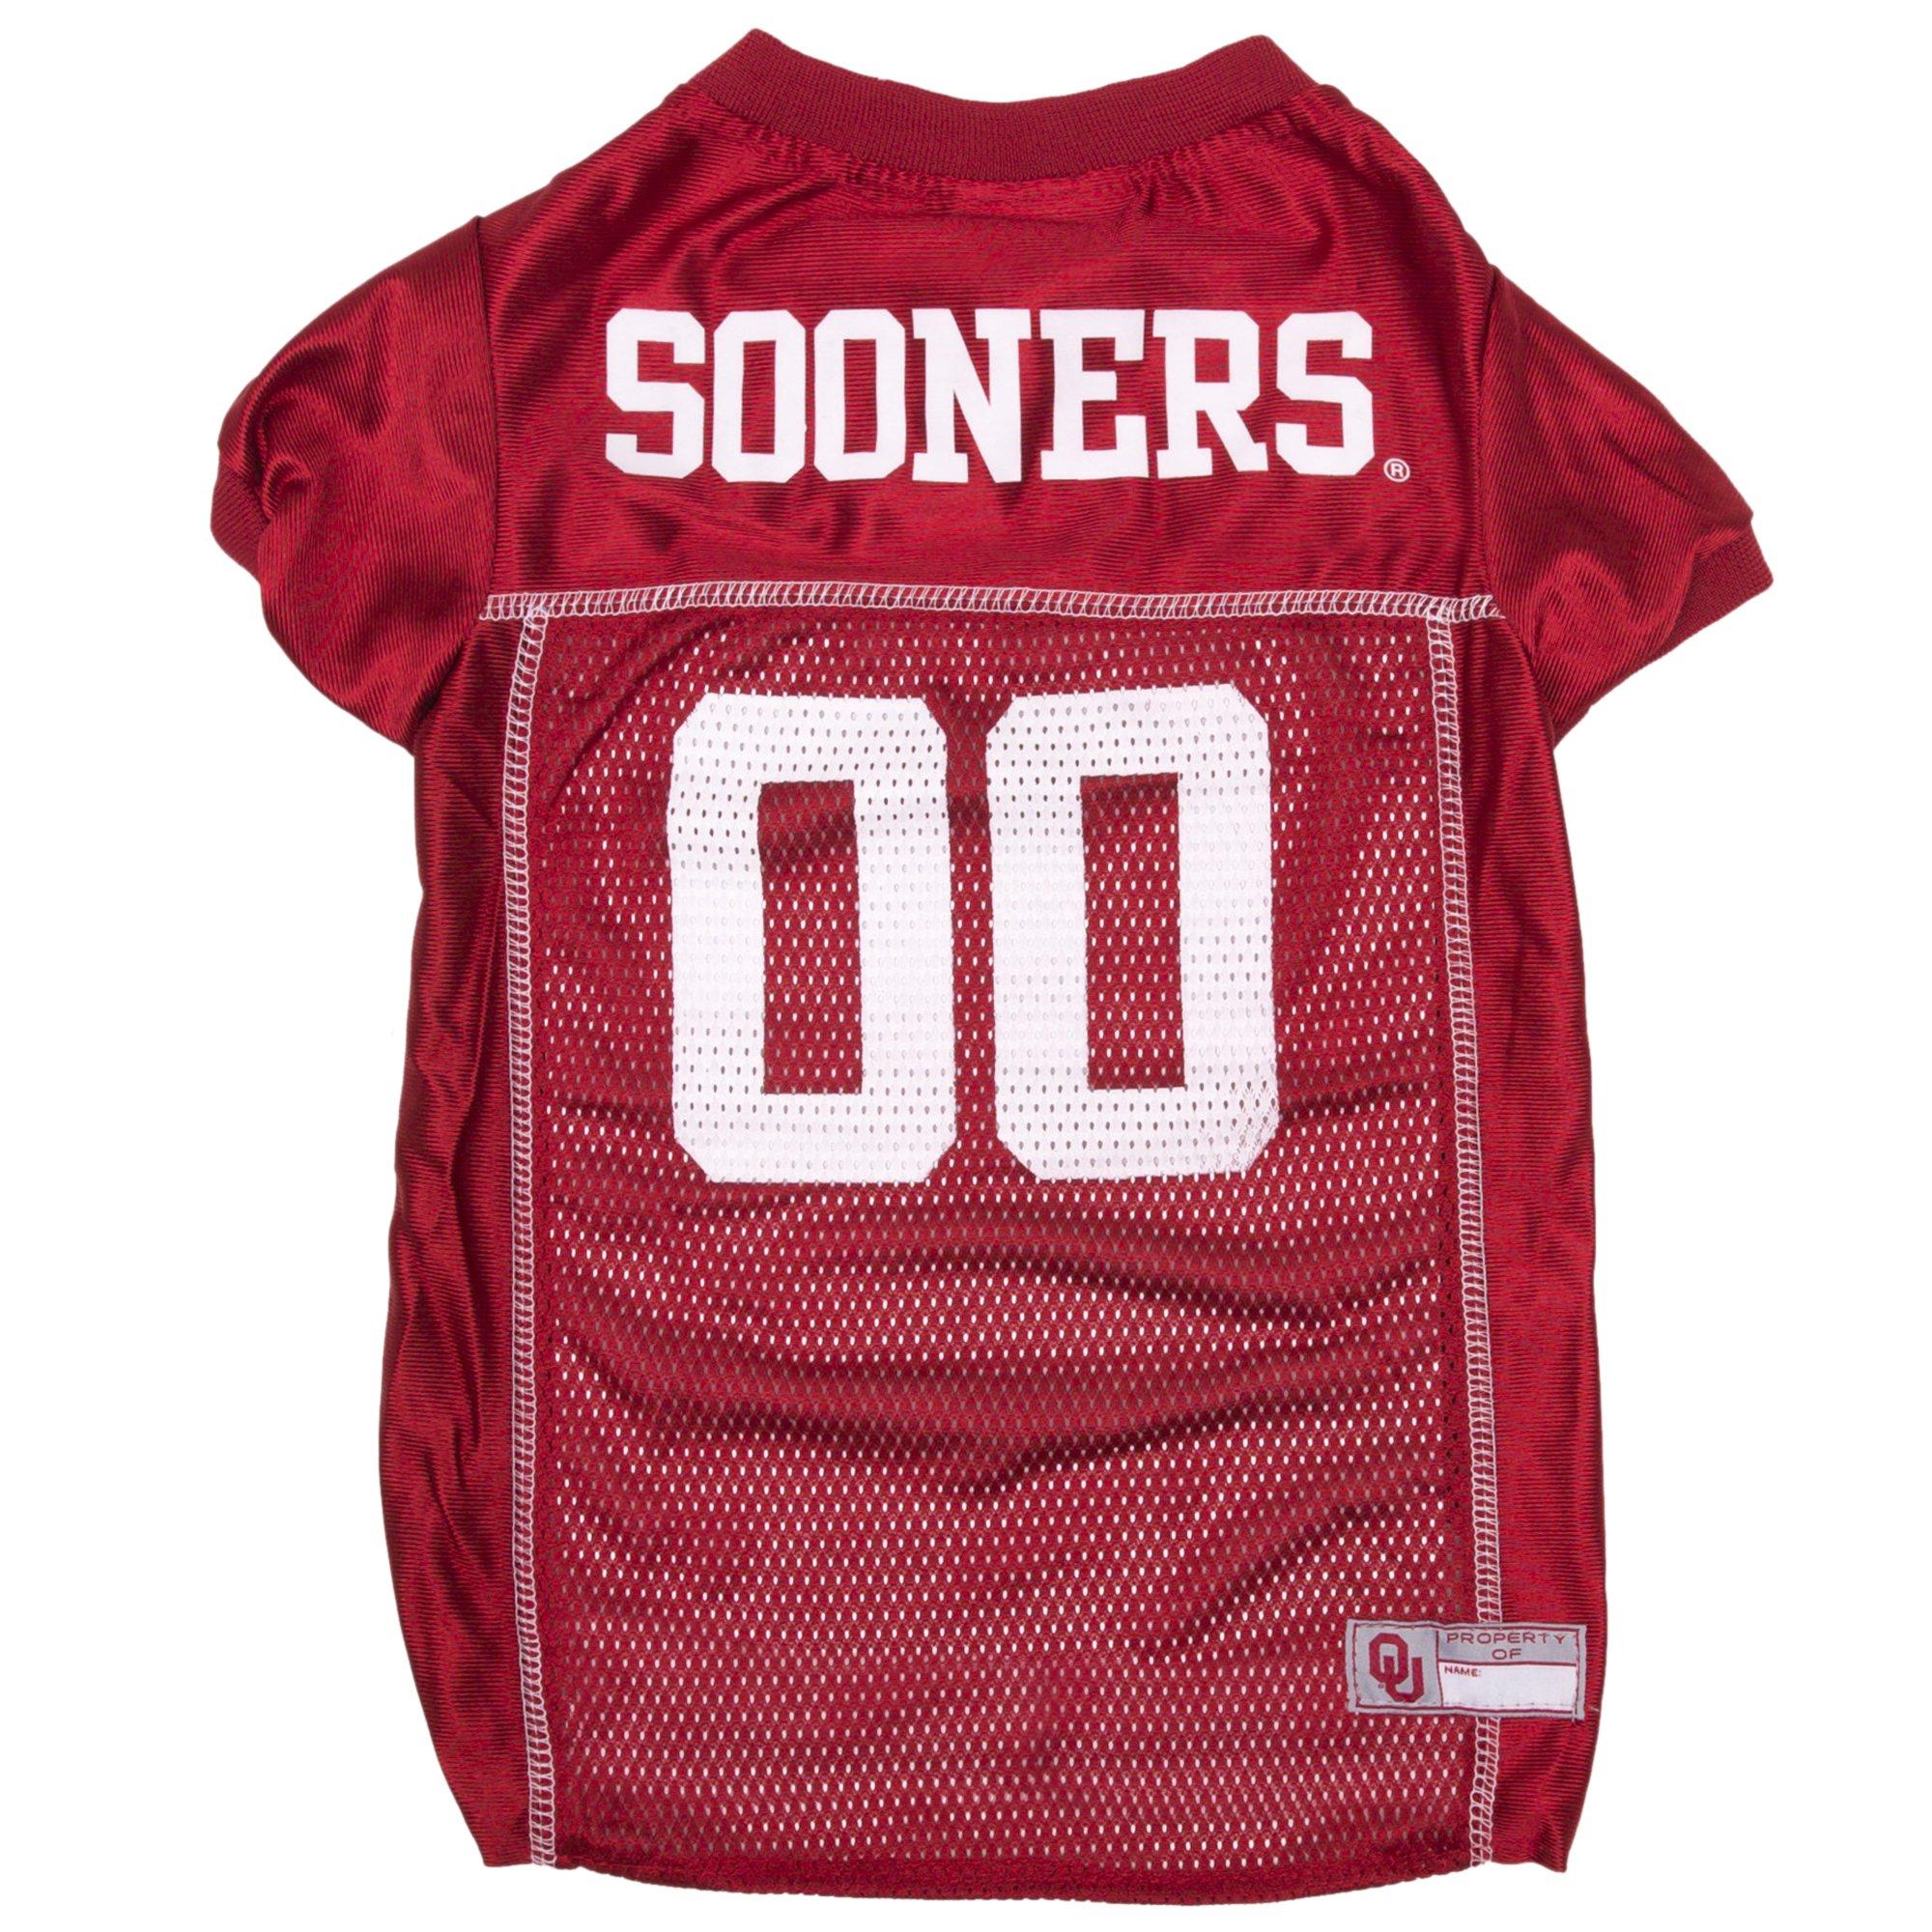 NcAA college Oklahoma Sooners Mesh Jersey for DOgS cATS, Small Licensed Big Dog Jersey with your Favorite FootballBasketball college Team